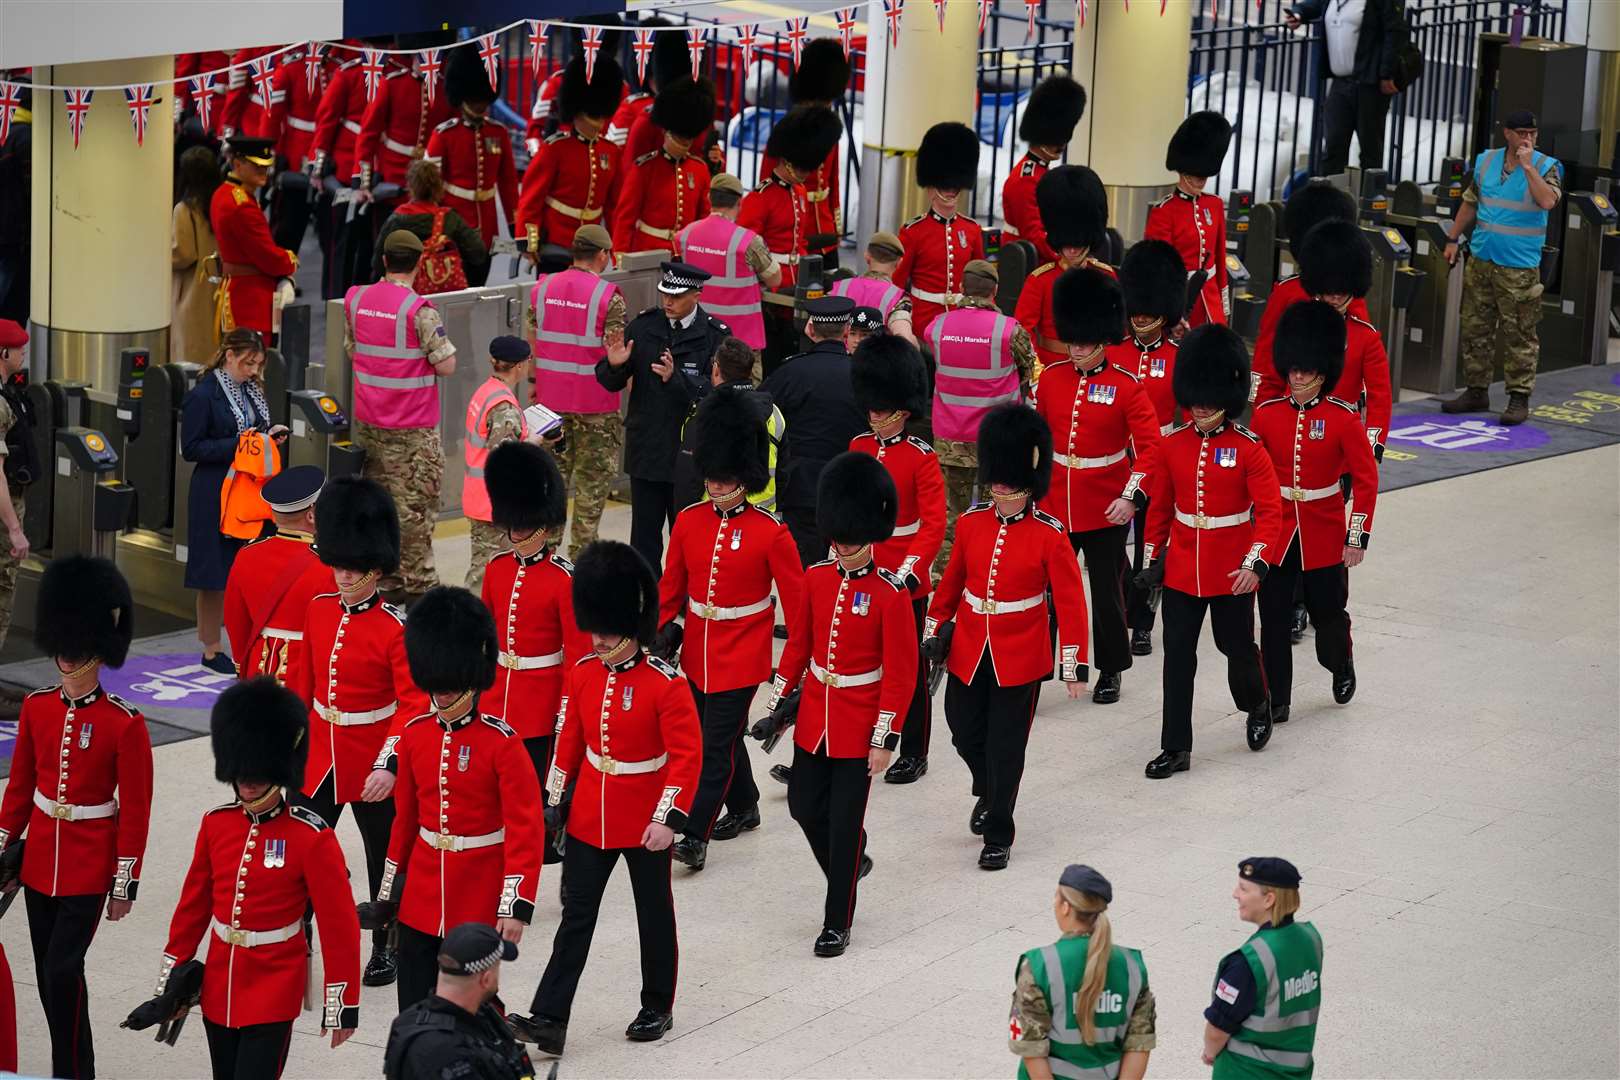 Guardsmen arrive by train for the coronation (Peter Byrne/PA)